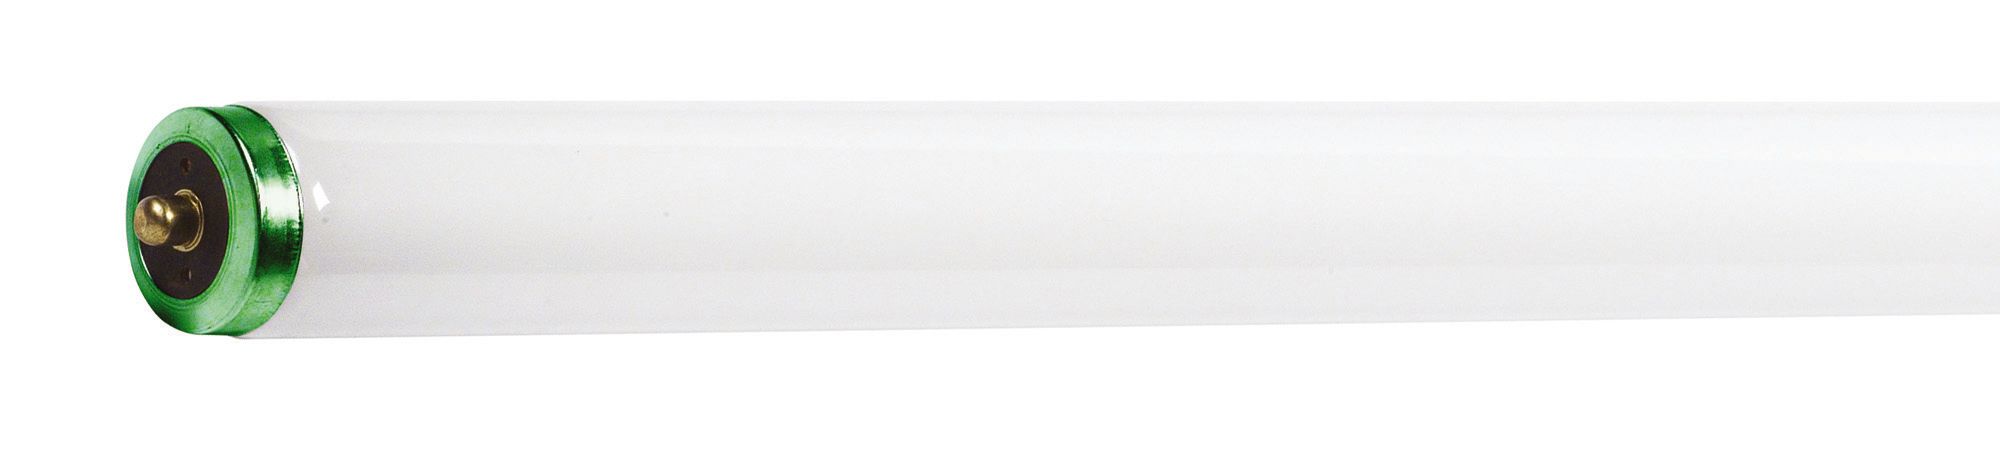 42319-4 (F96T12/CWSupreme/ALTO) Straight Tube Fluorescent Lamp Philips Lighting;Signify Lamps